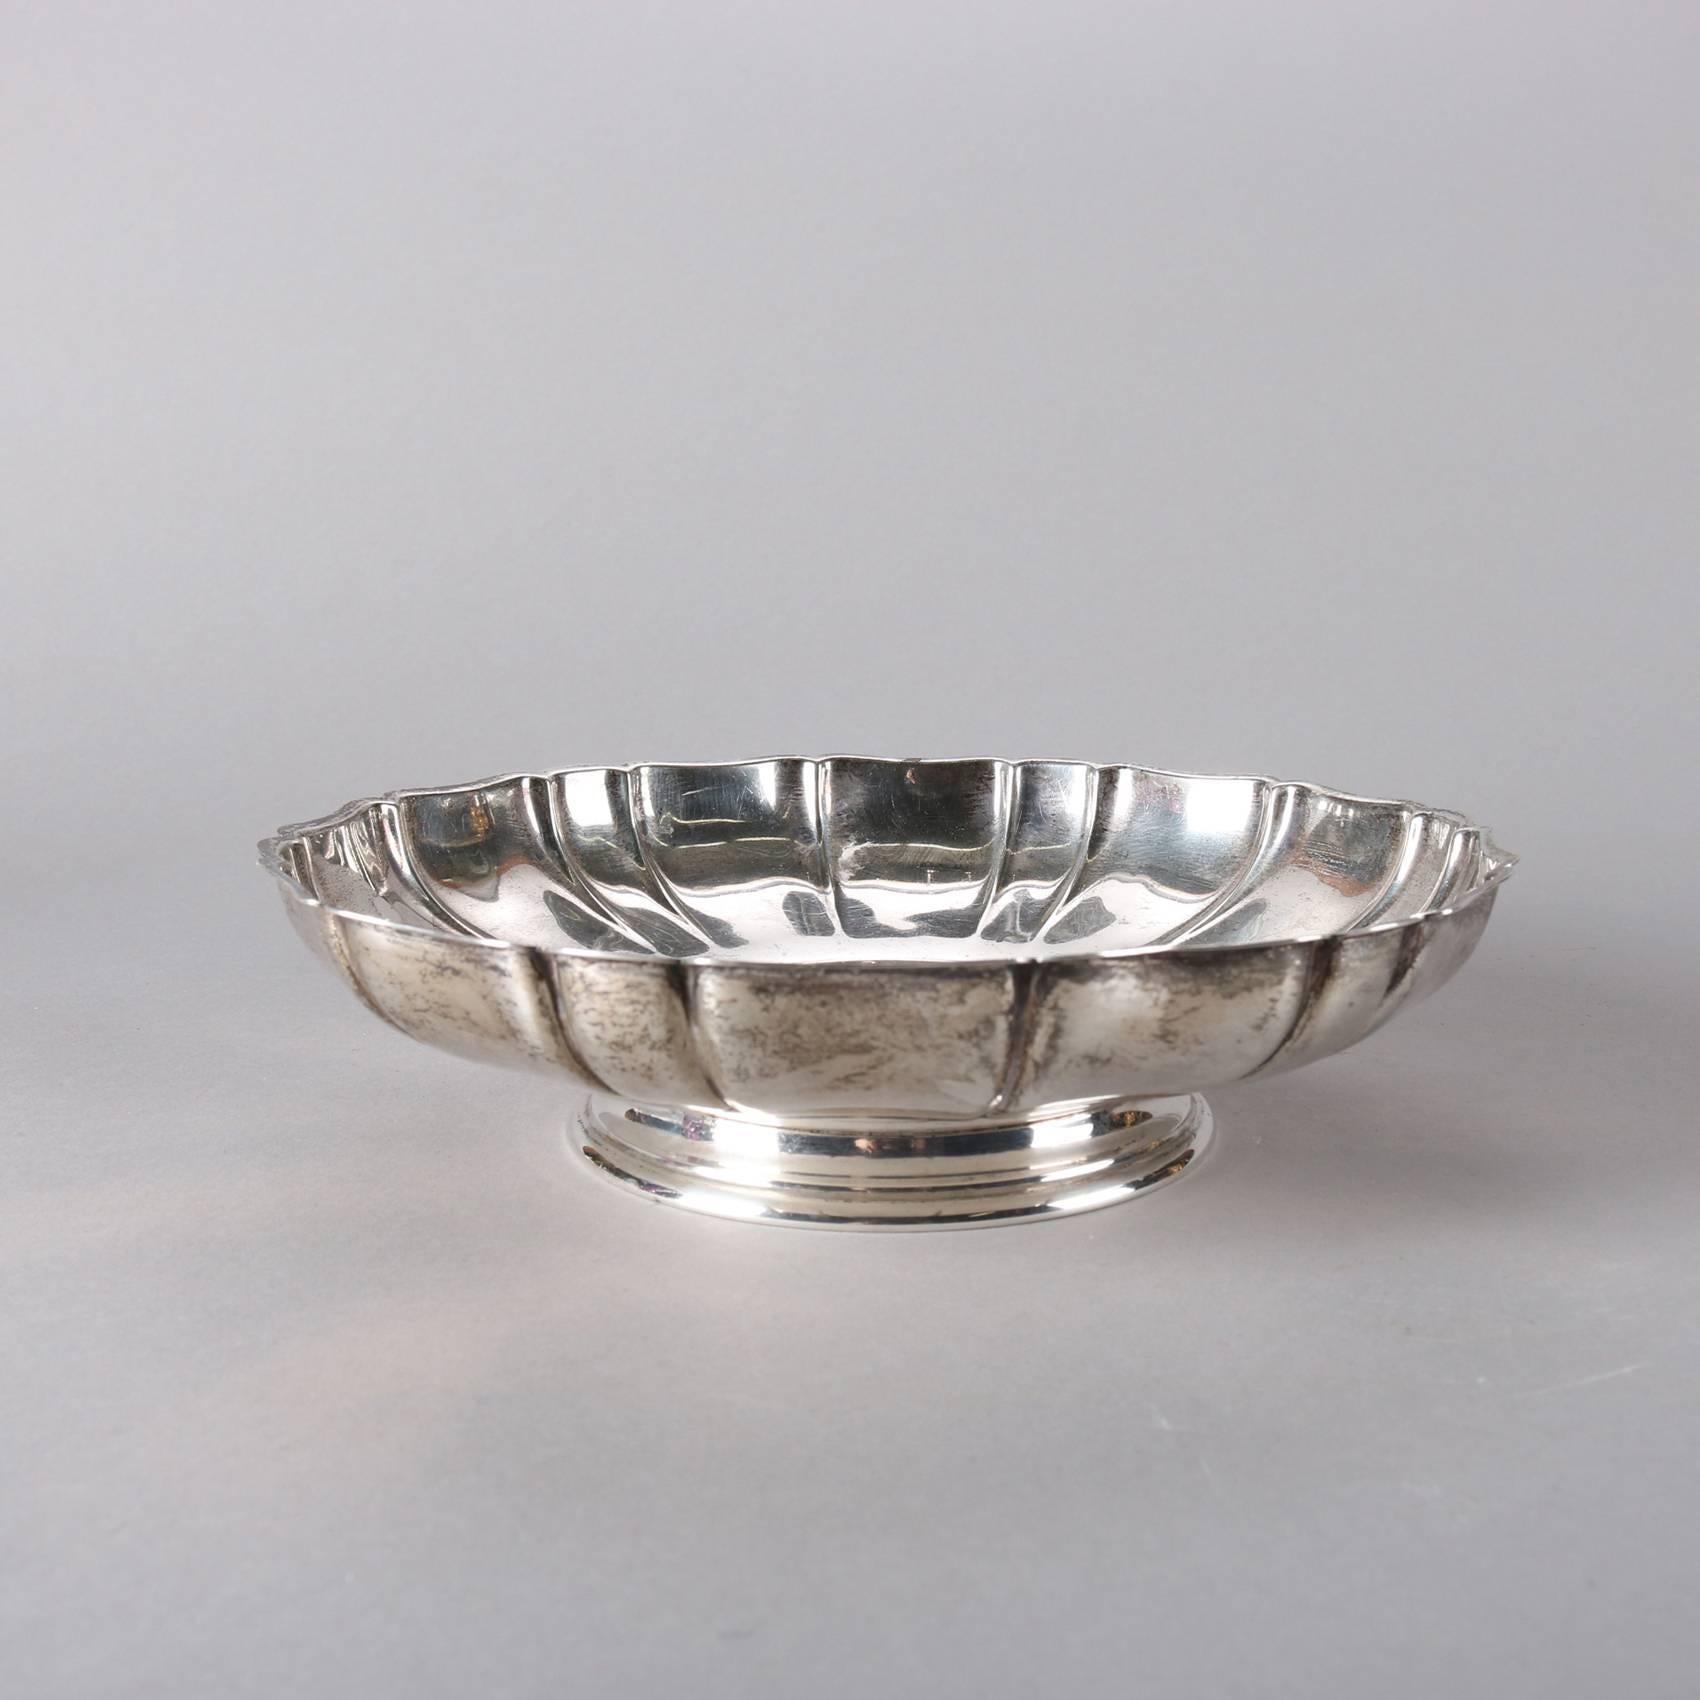 Antique sterling silver center bowl by Wallace features scalloped form and foot, centre monogrammed, hallmarked on base, 16 toz, 20th century

Measures: 2.5